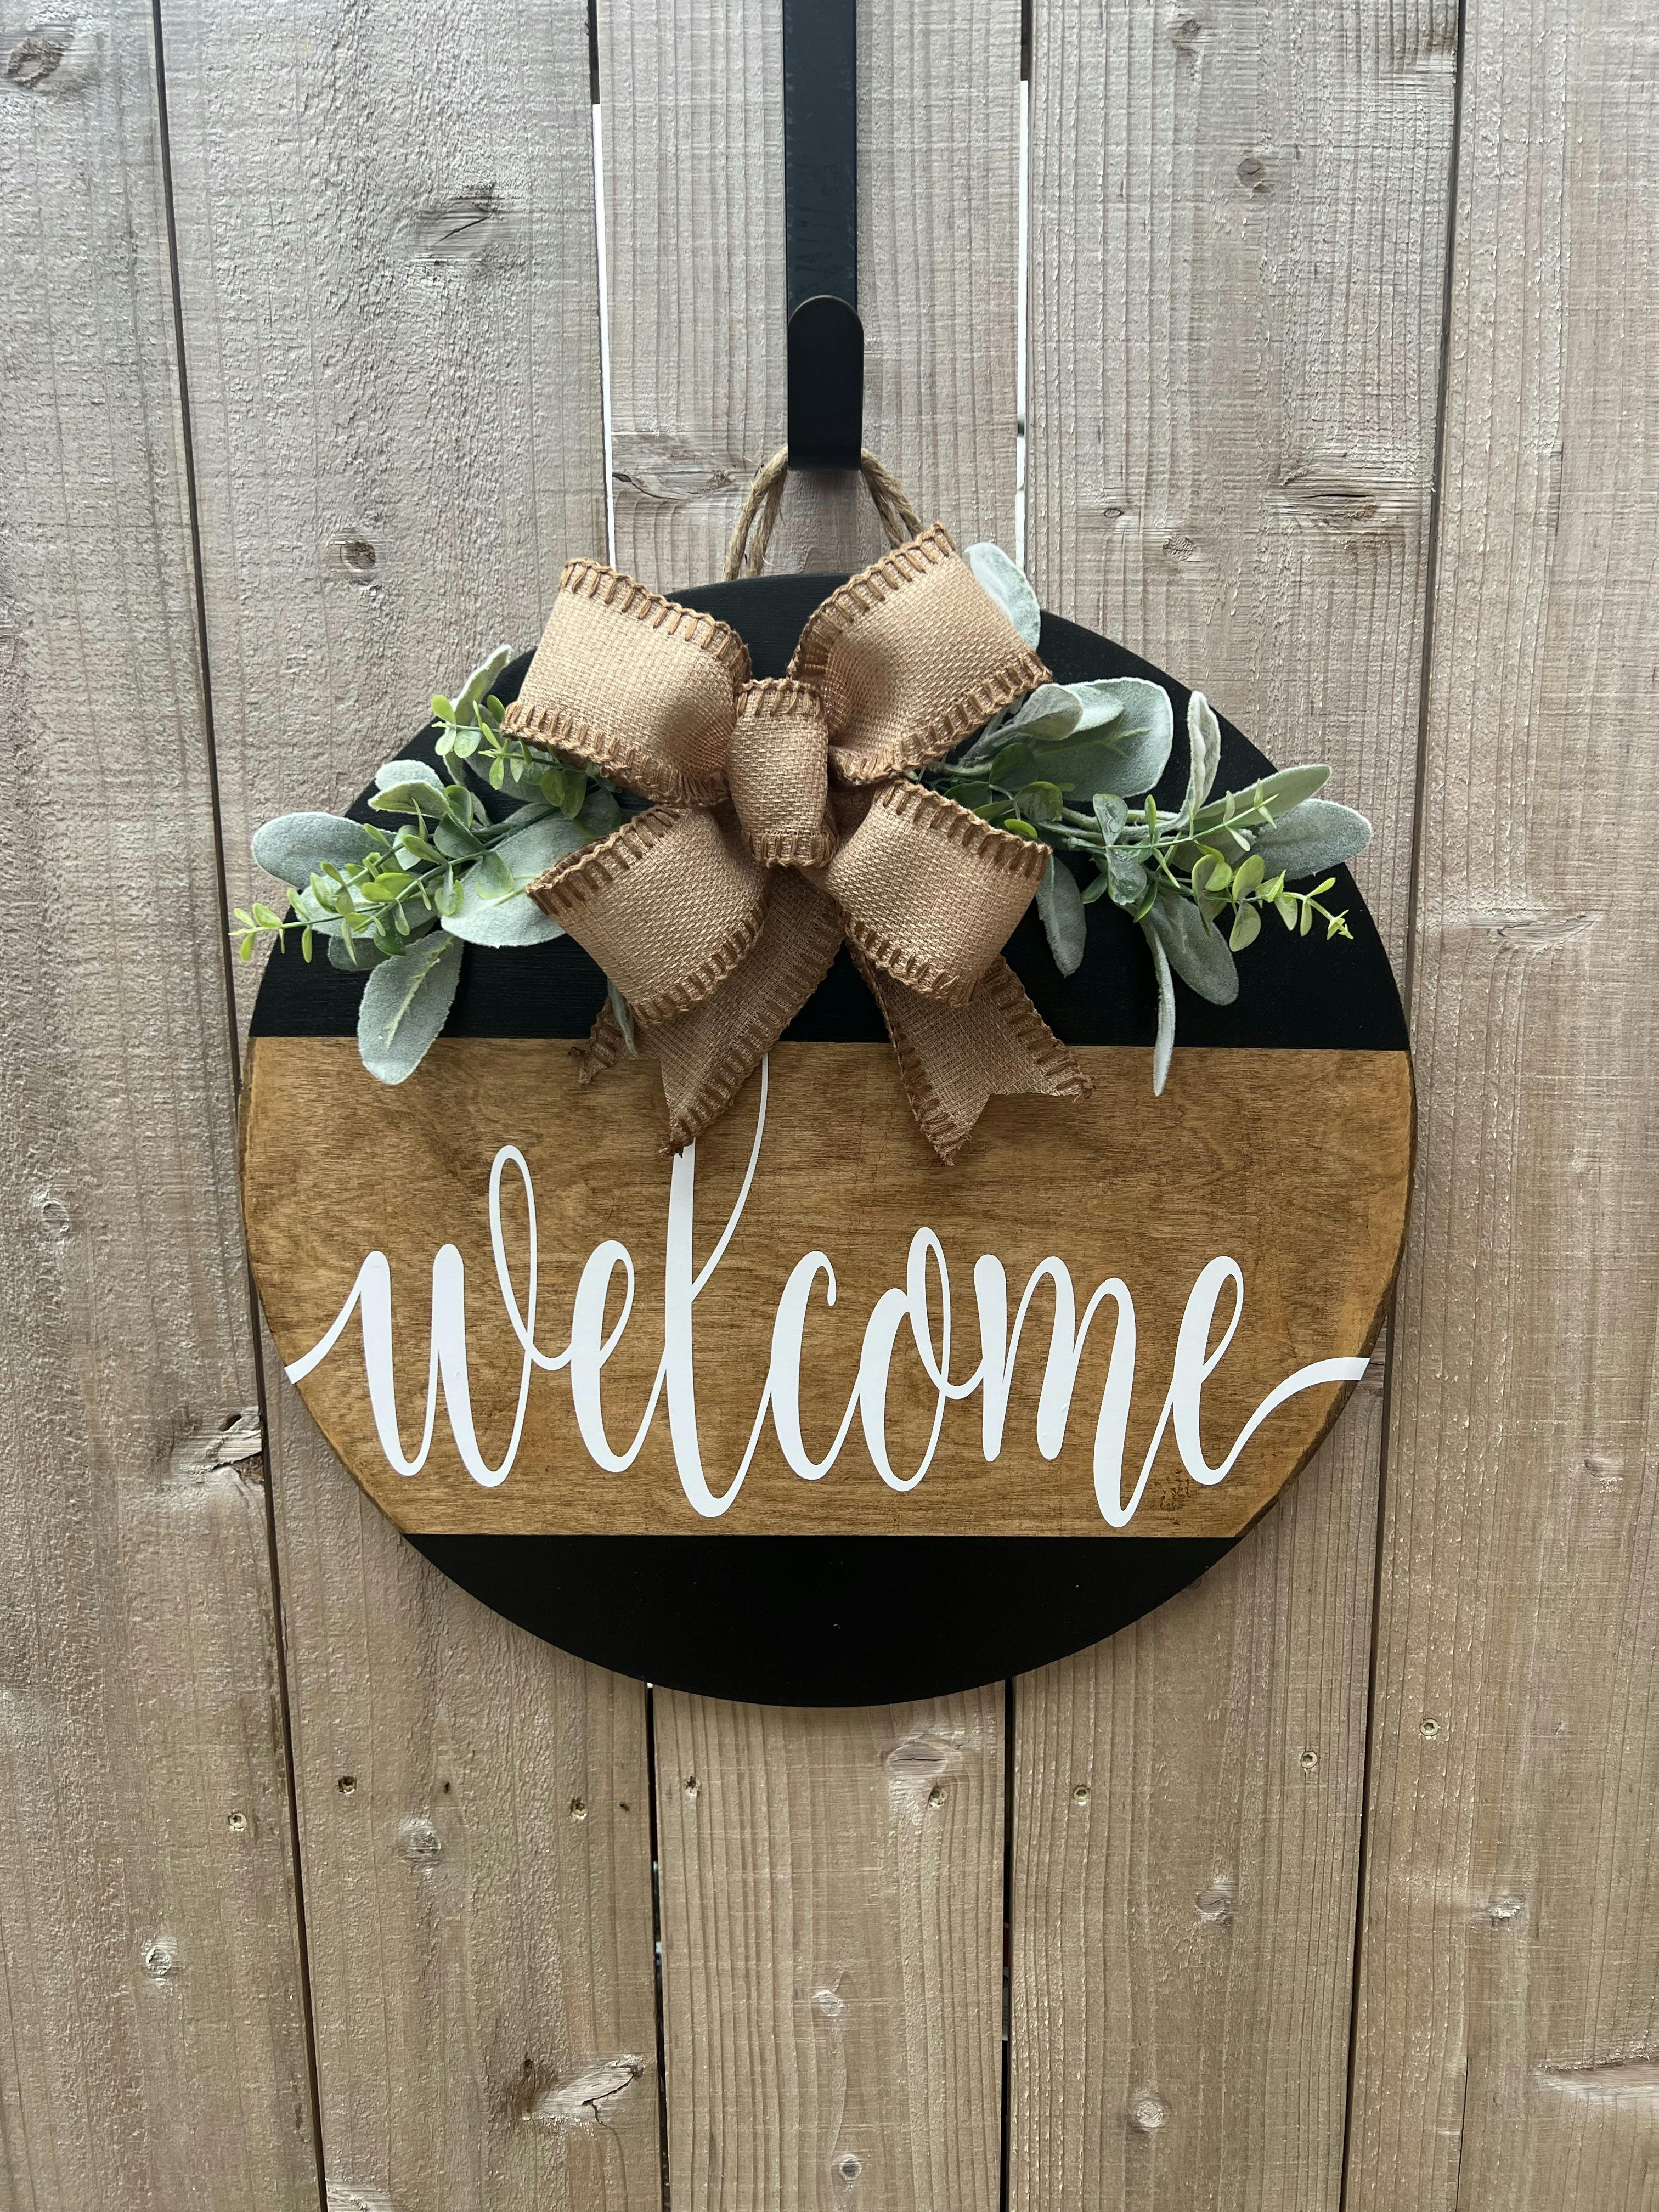 Closing gift|House Warming Gift|Year Round Wreath 